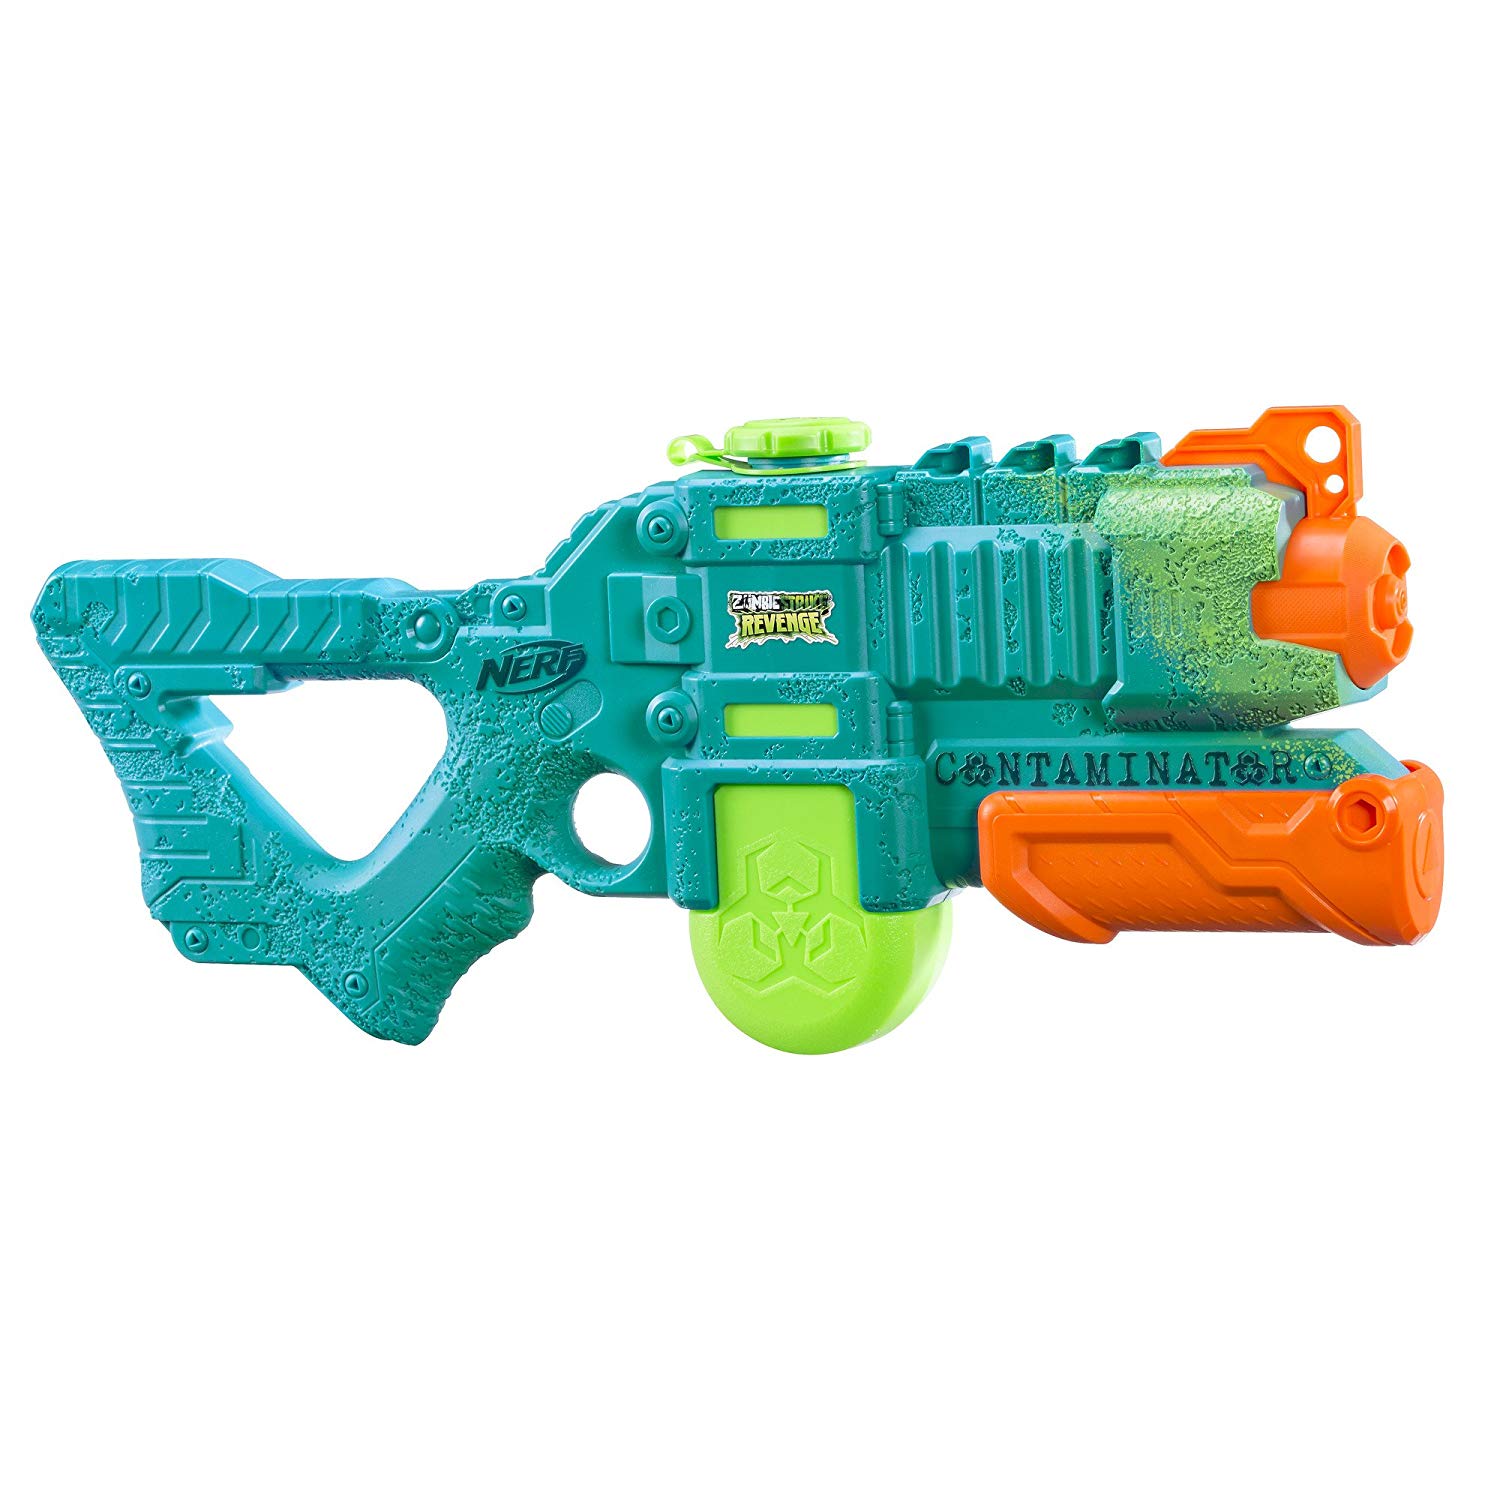 Choices may vary Can You Imagine Water Bazooka Water Gun Blaster Assorted 